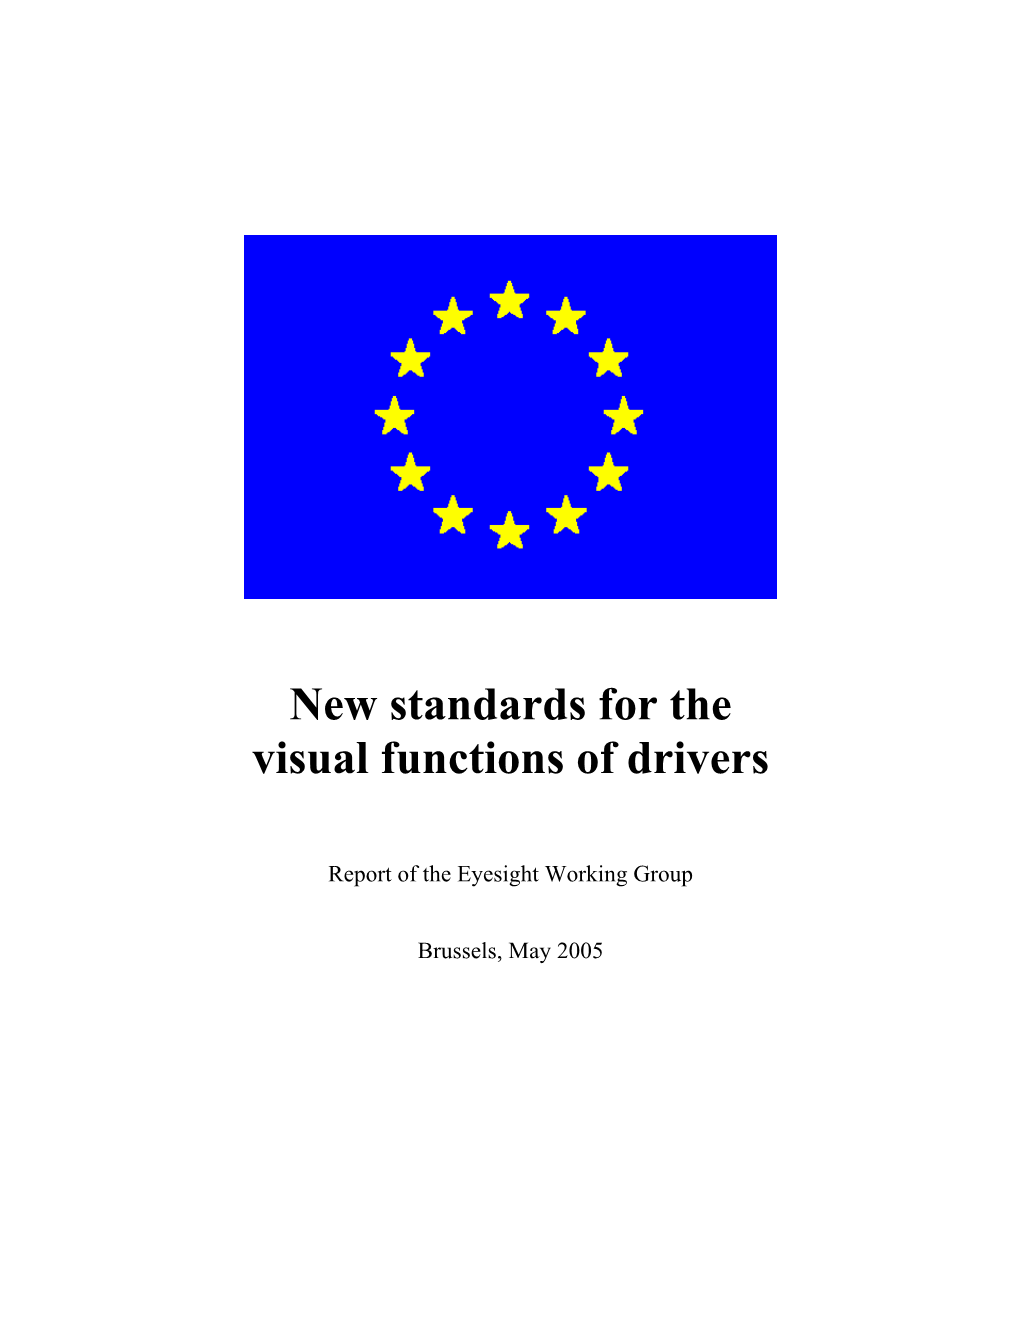 New Standards for the Visual Function of Drivers